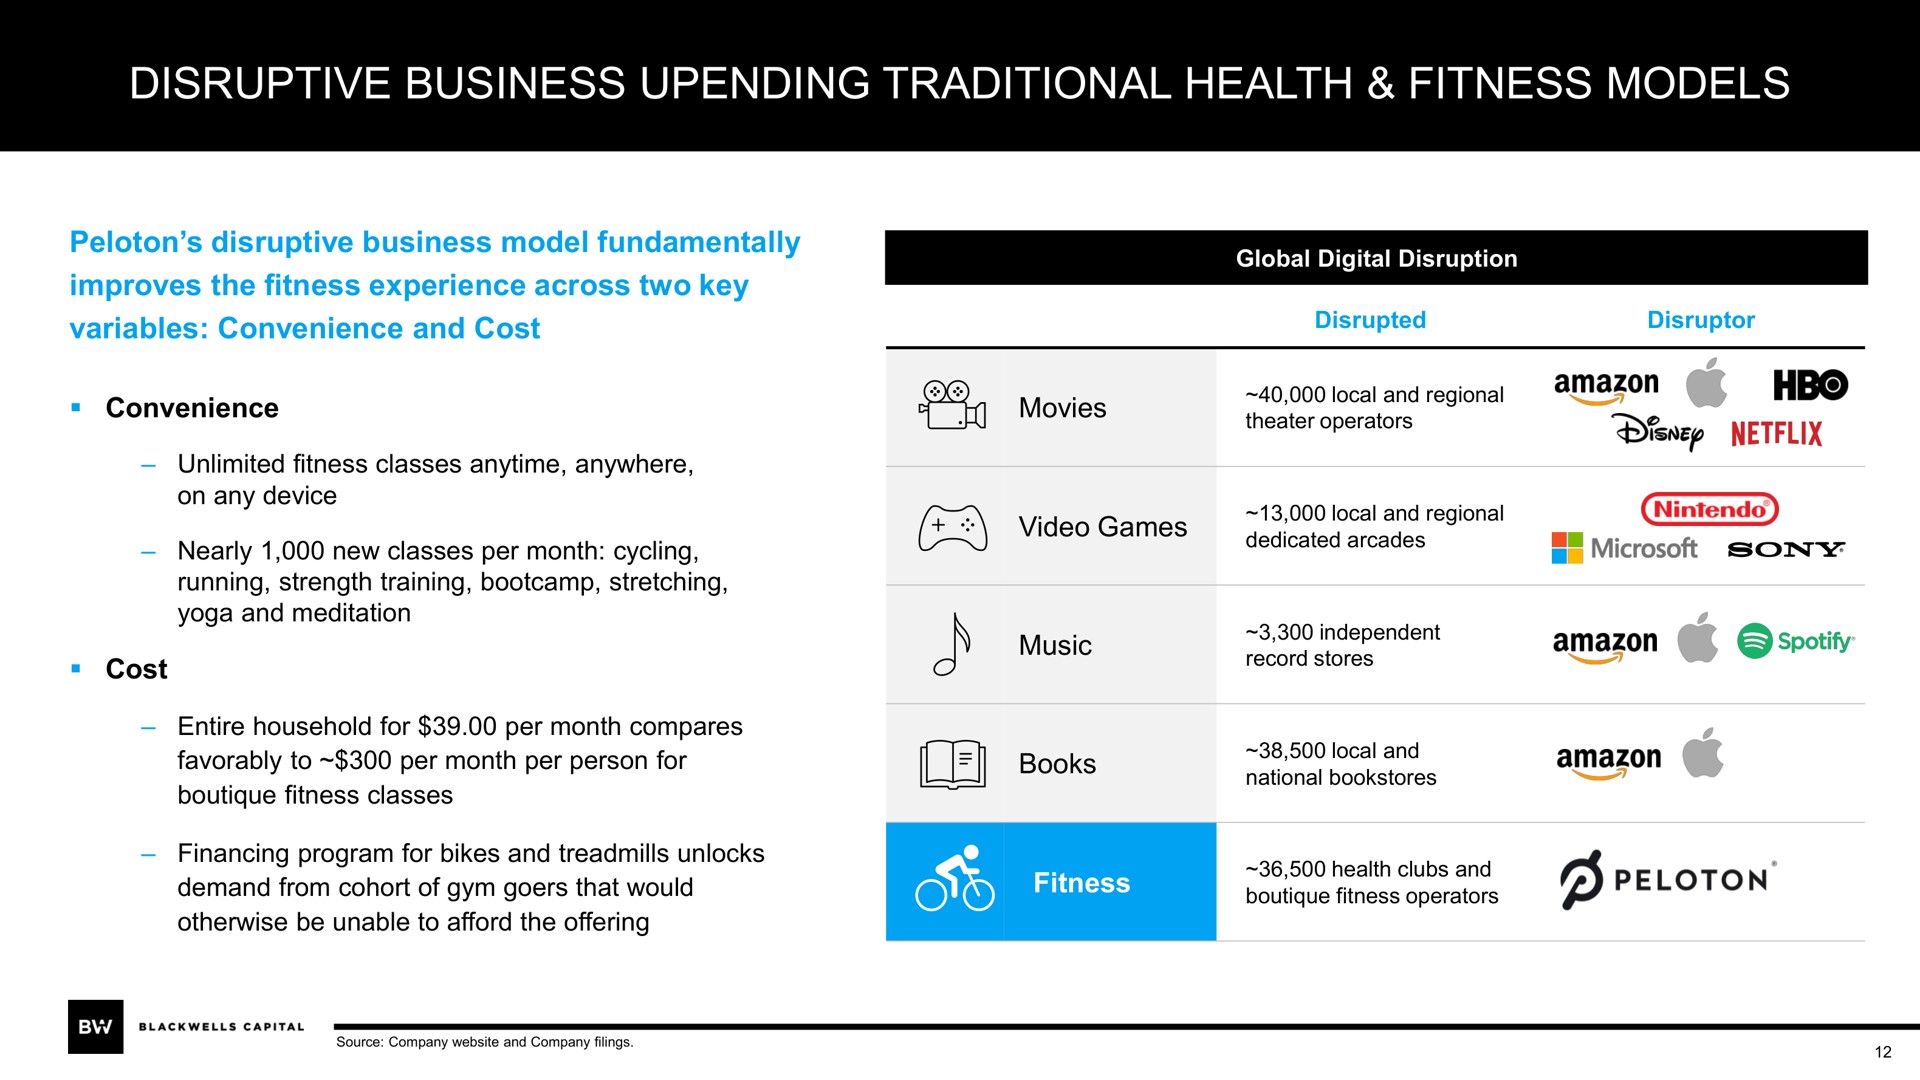 disruptive business upending traditional health fitness models a | Blackwells Capital